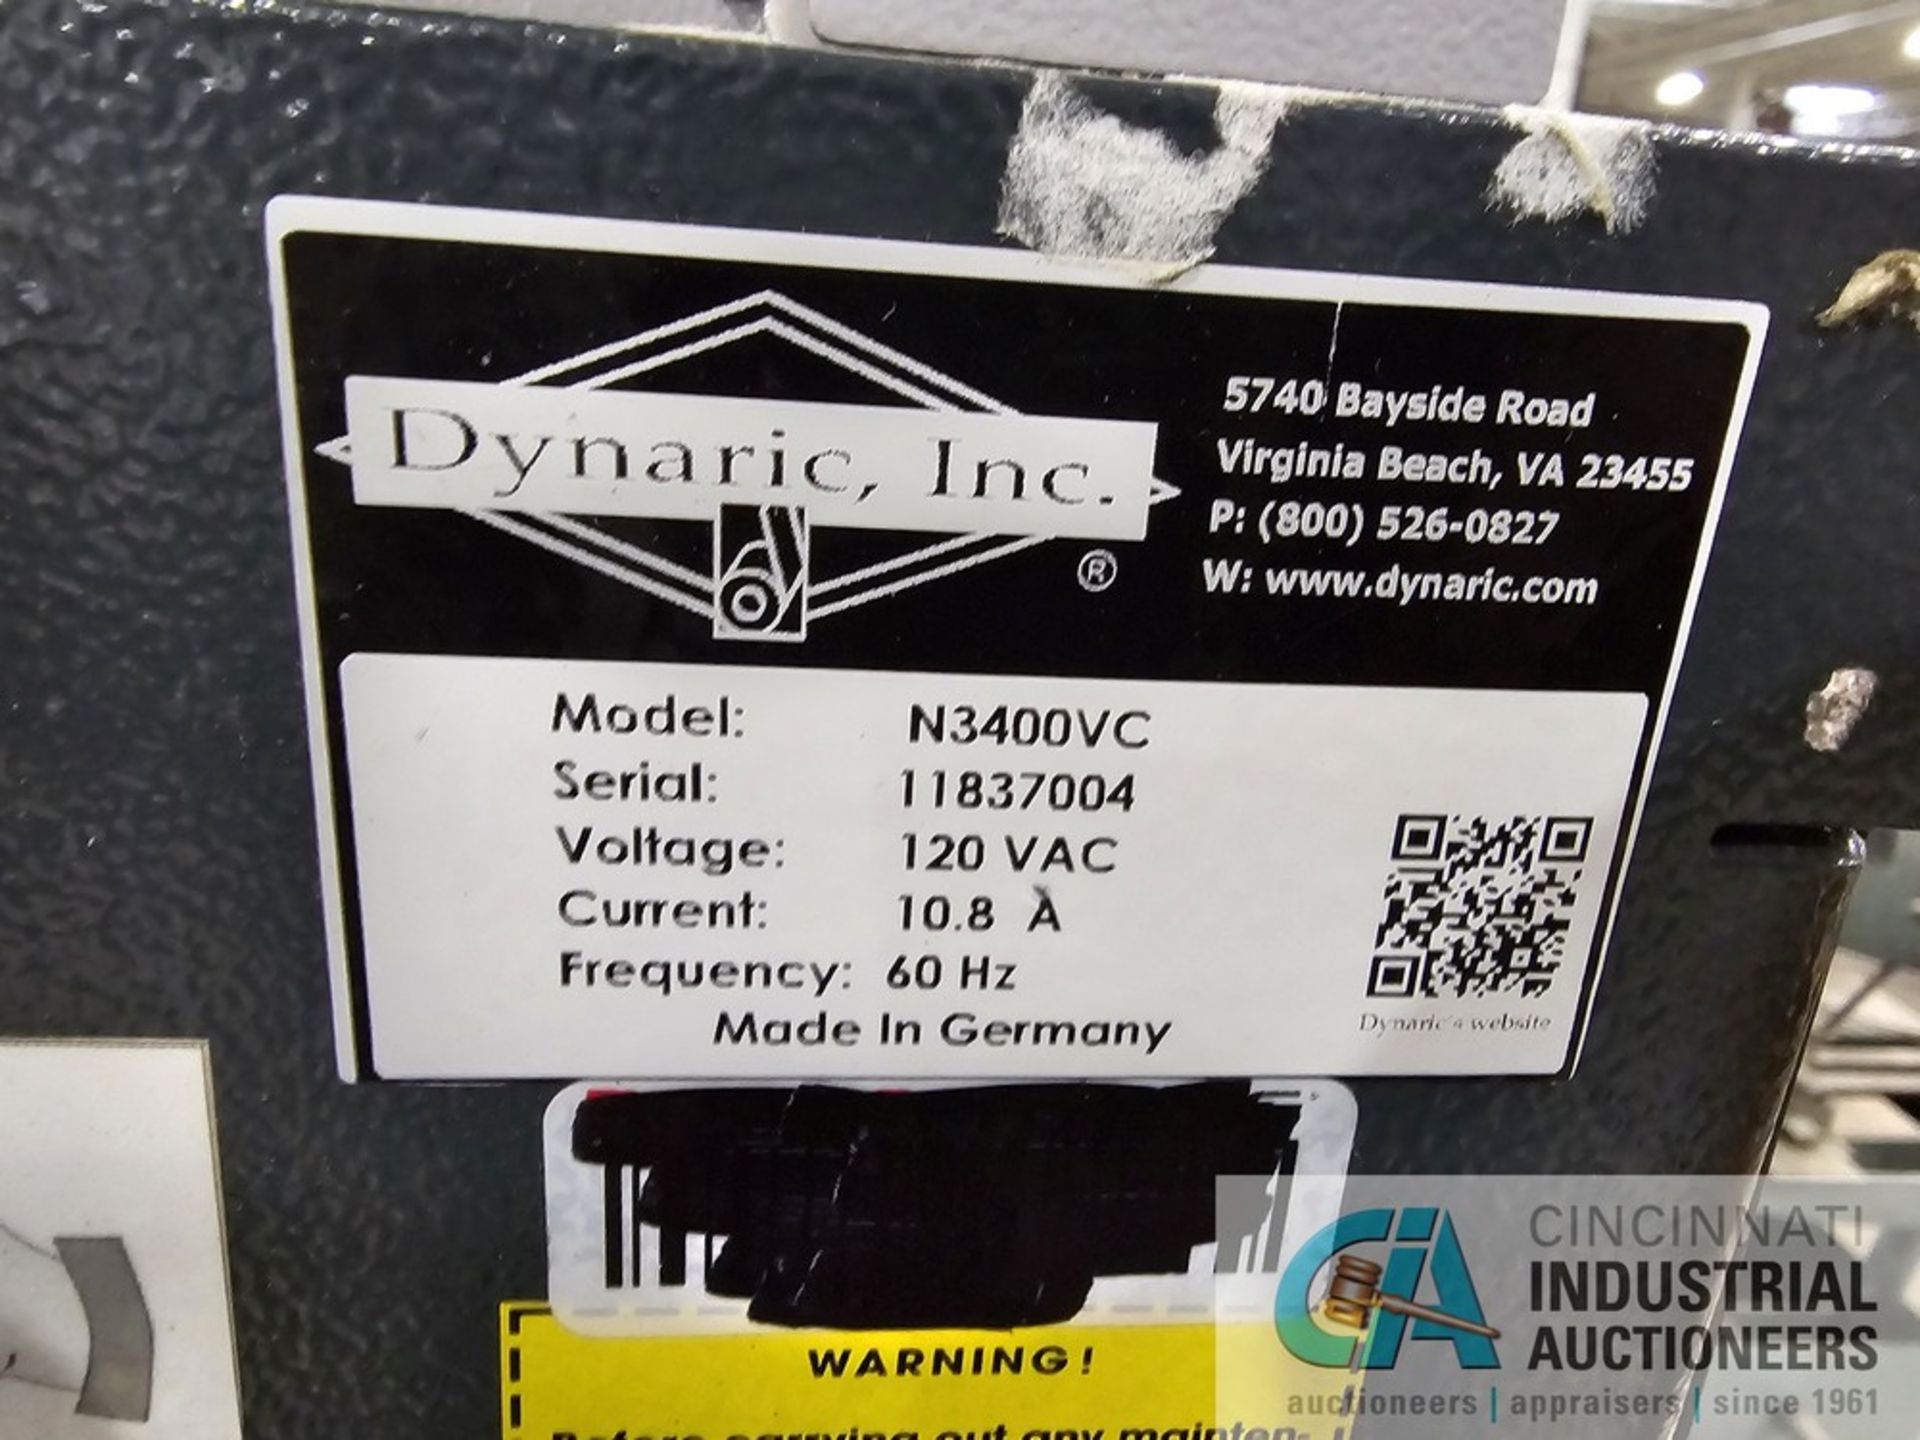 DYNARIC MODEL N3400VC AUTO STRAPPER, APPROX. 26" X 26" WINDOW, 110 VOLT - Image 7 of 7